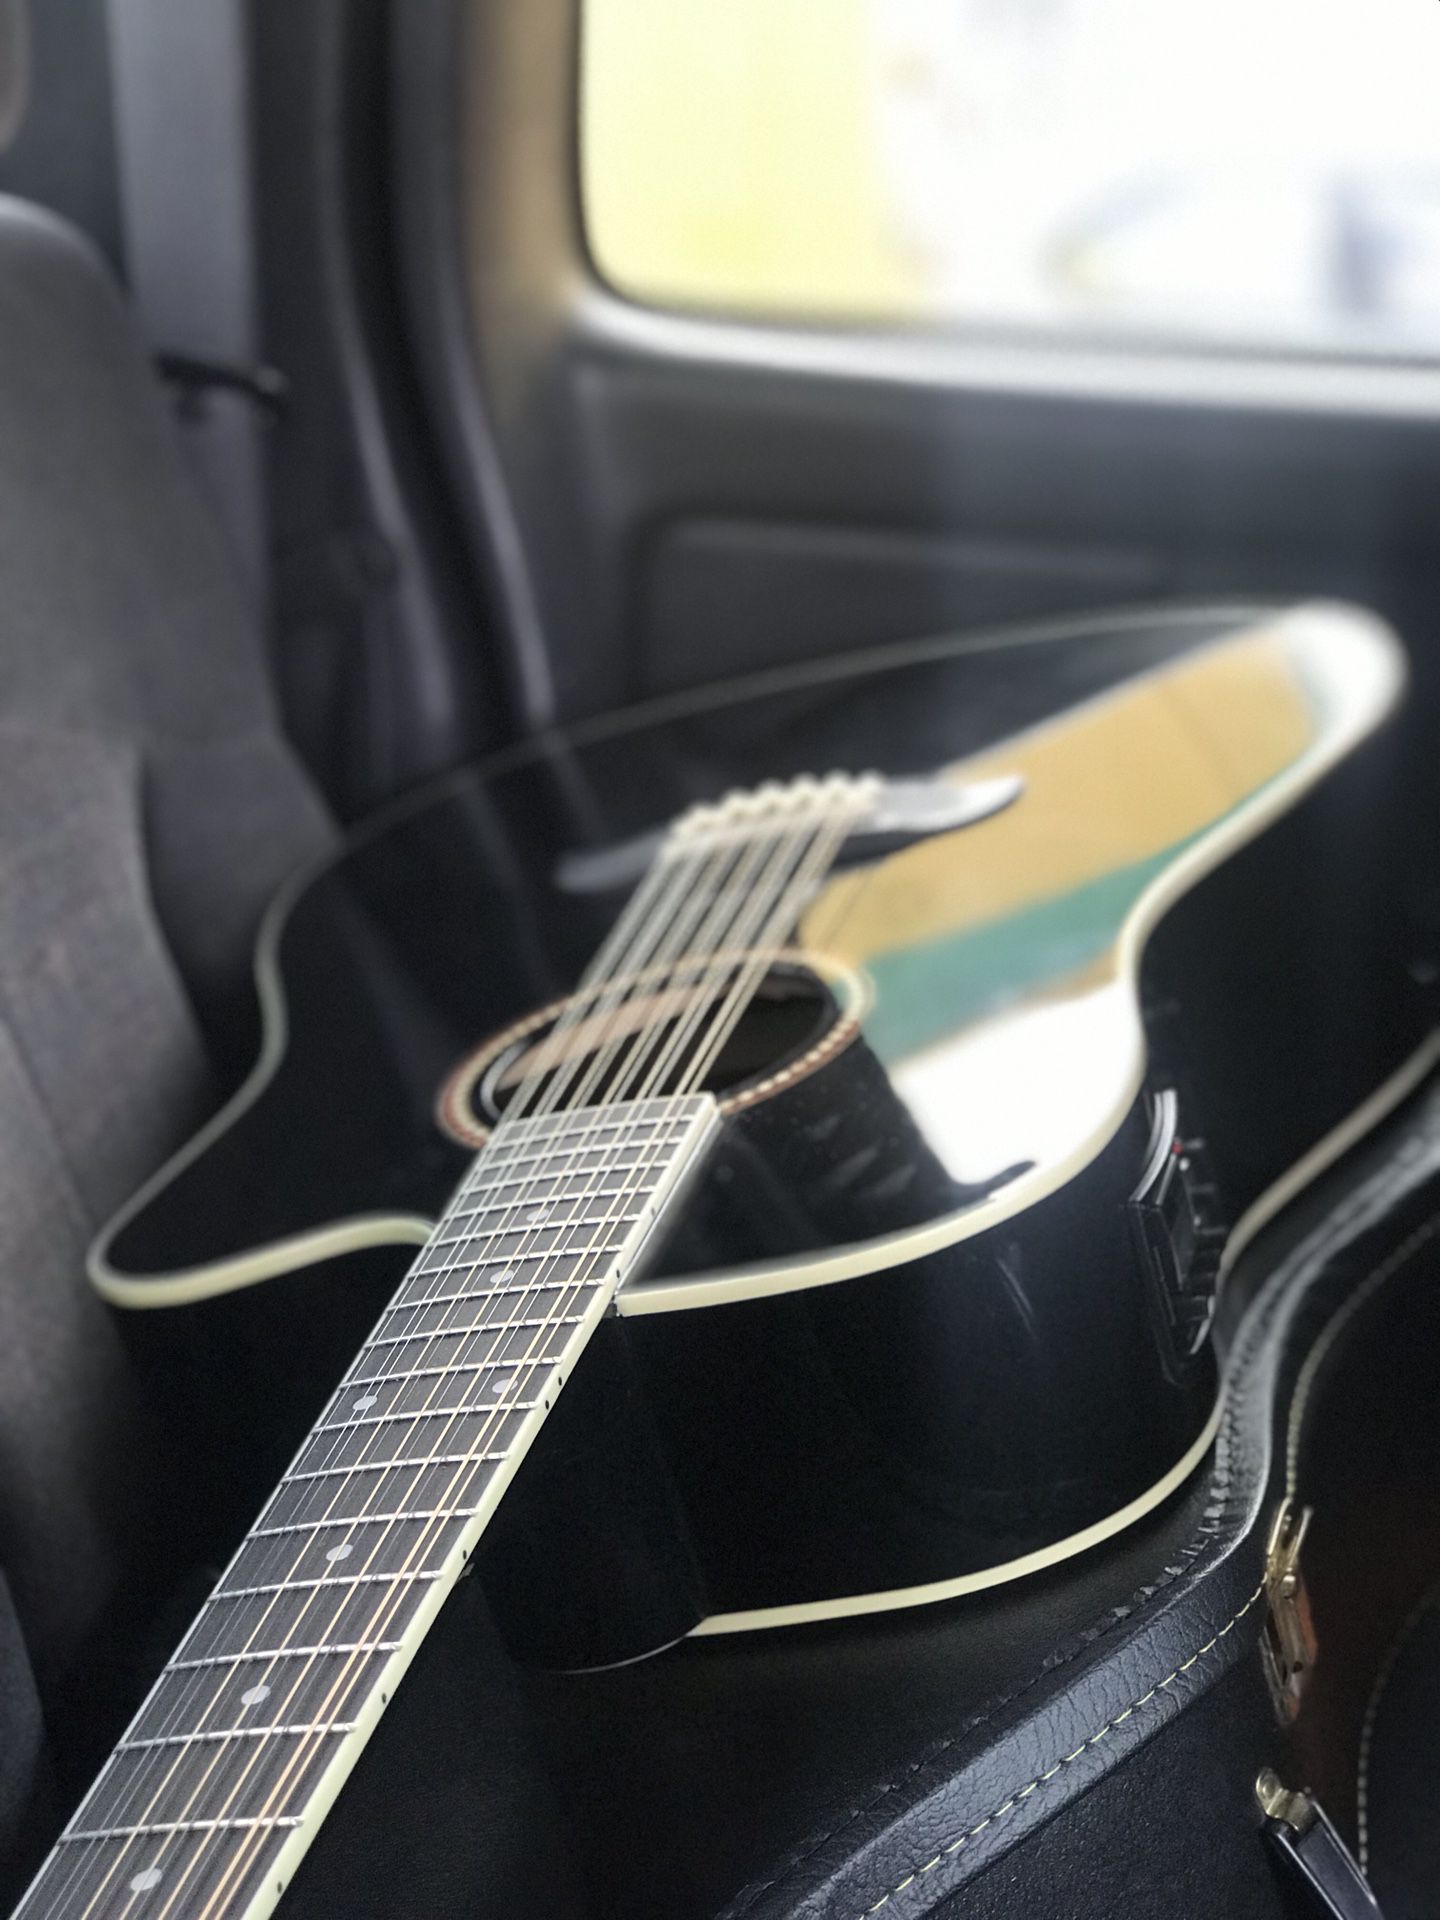 12 String Acoustic Electric Guitar